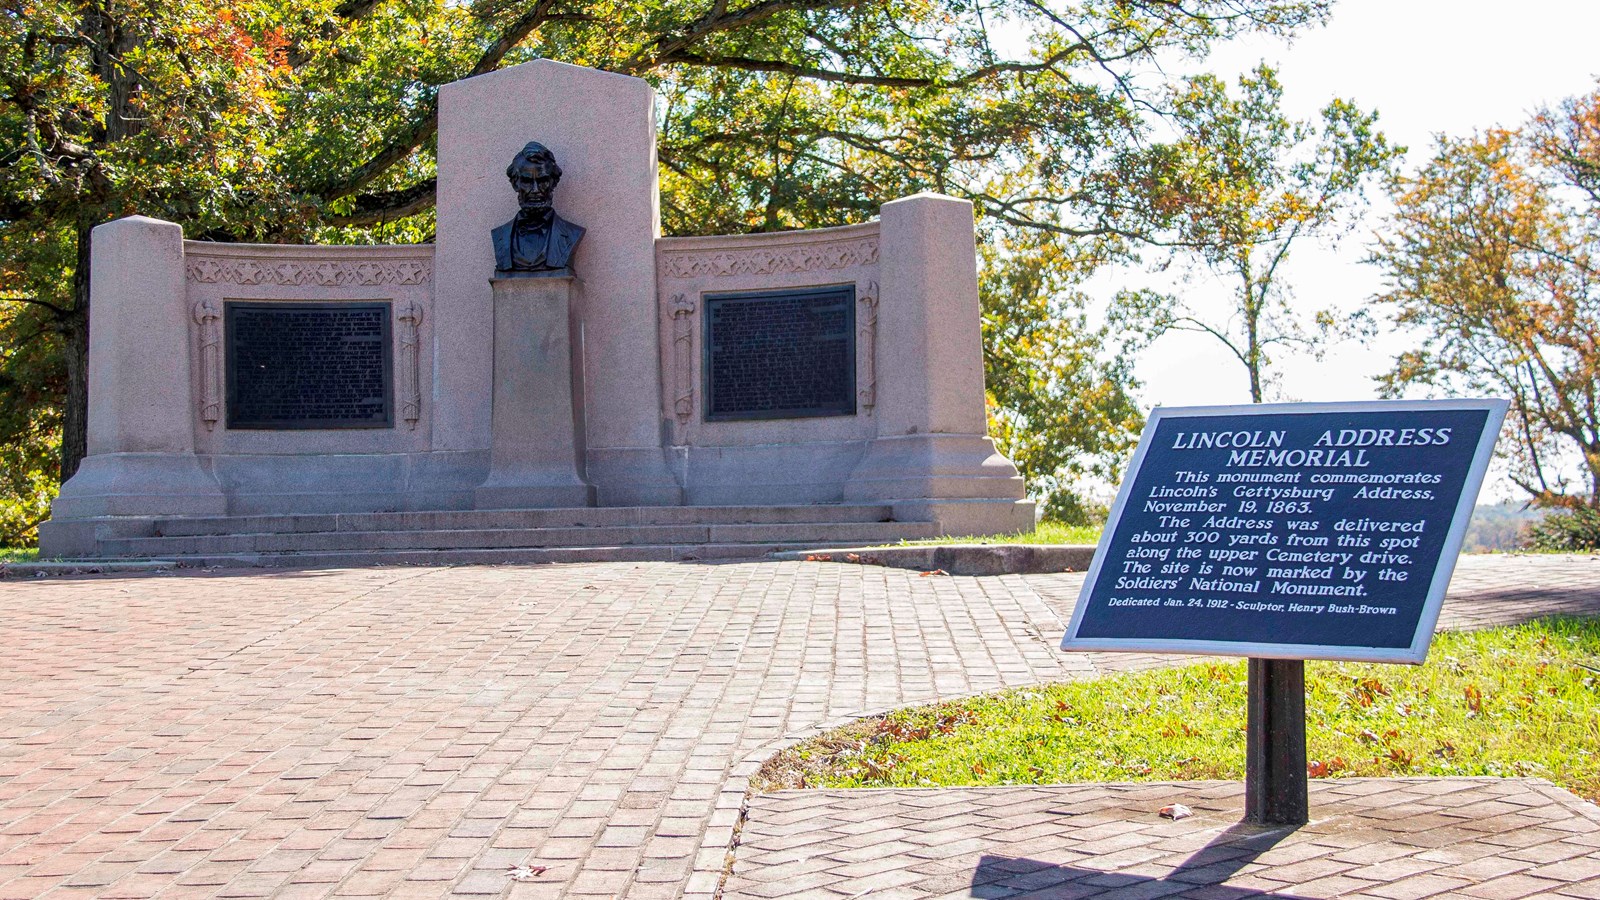 A large monument with a bust of Abraham Lincoln and two bronze plaques with the Gettysburg Adress